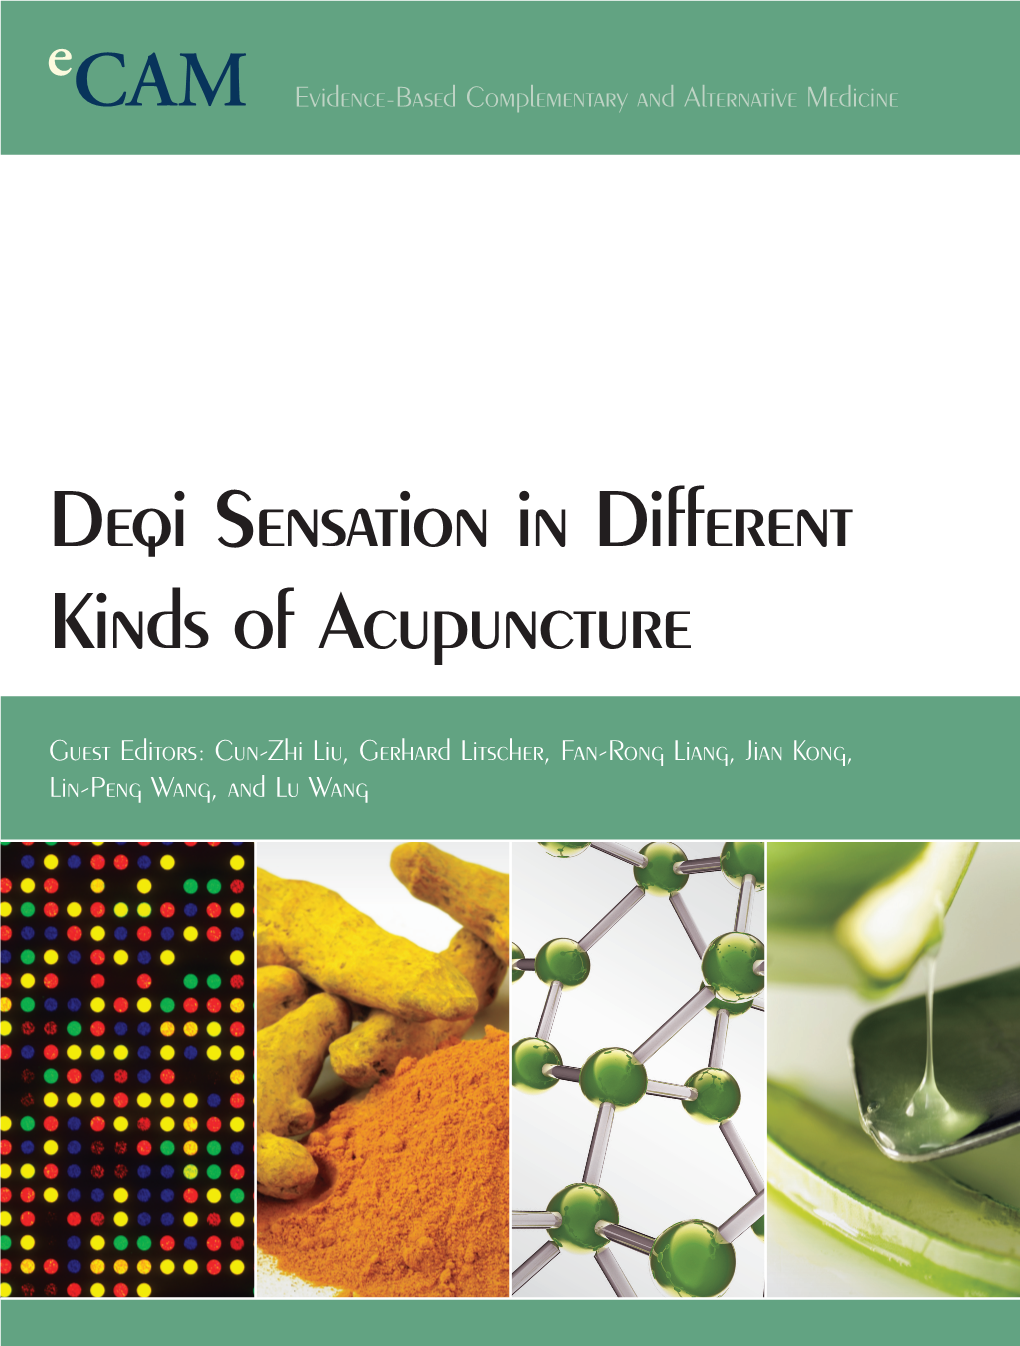 Deqi Sensation in Different Kinds of Acupuncture